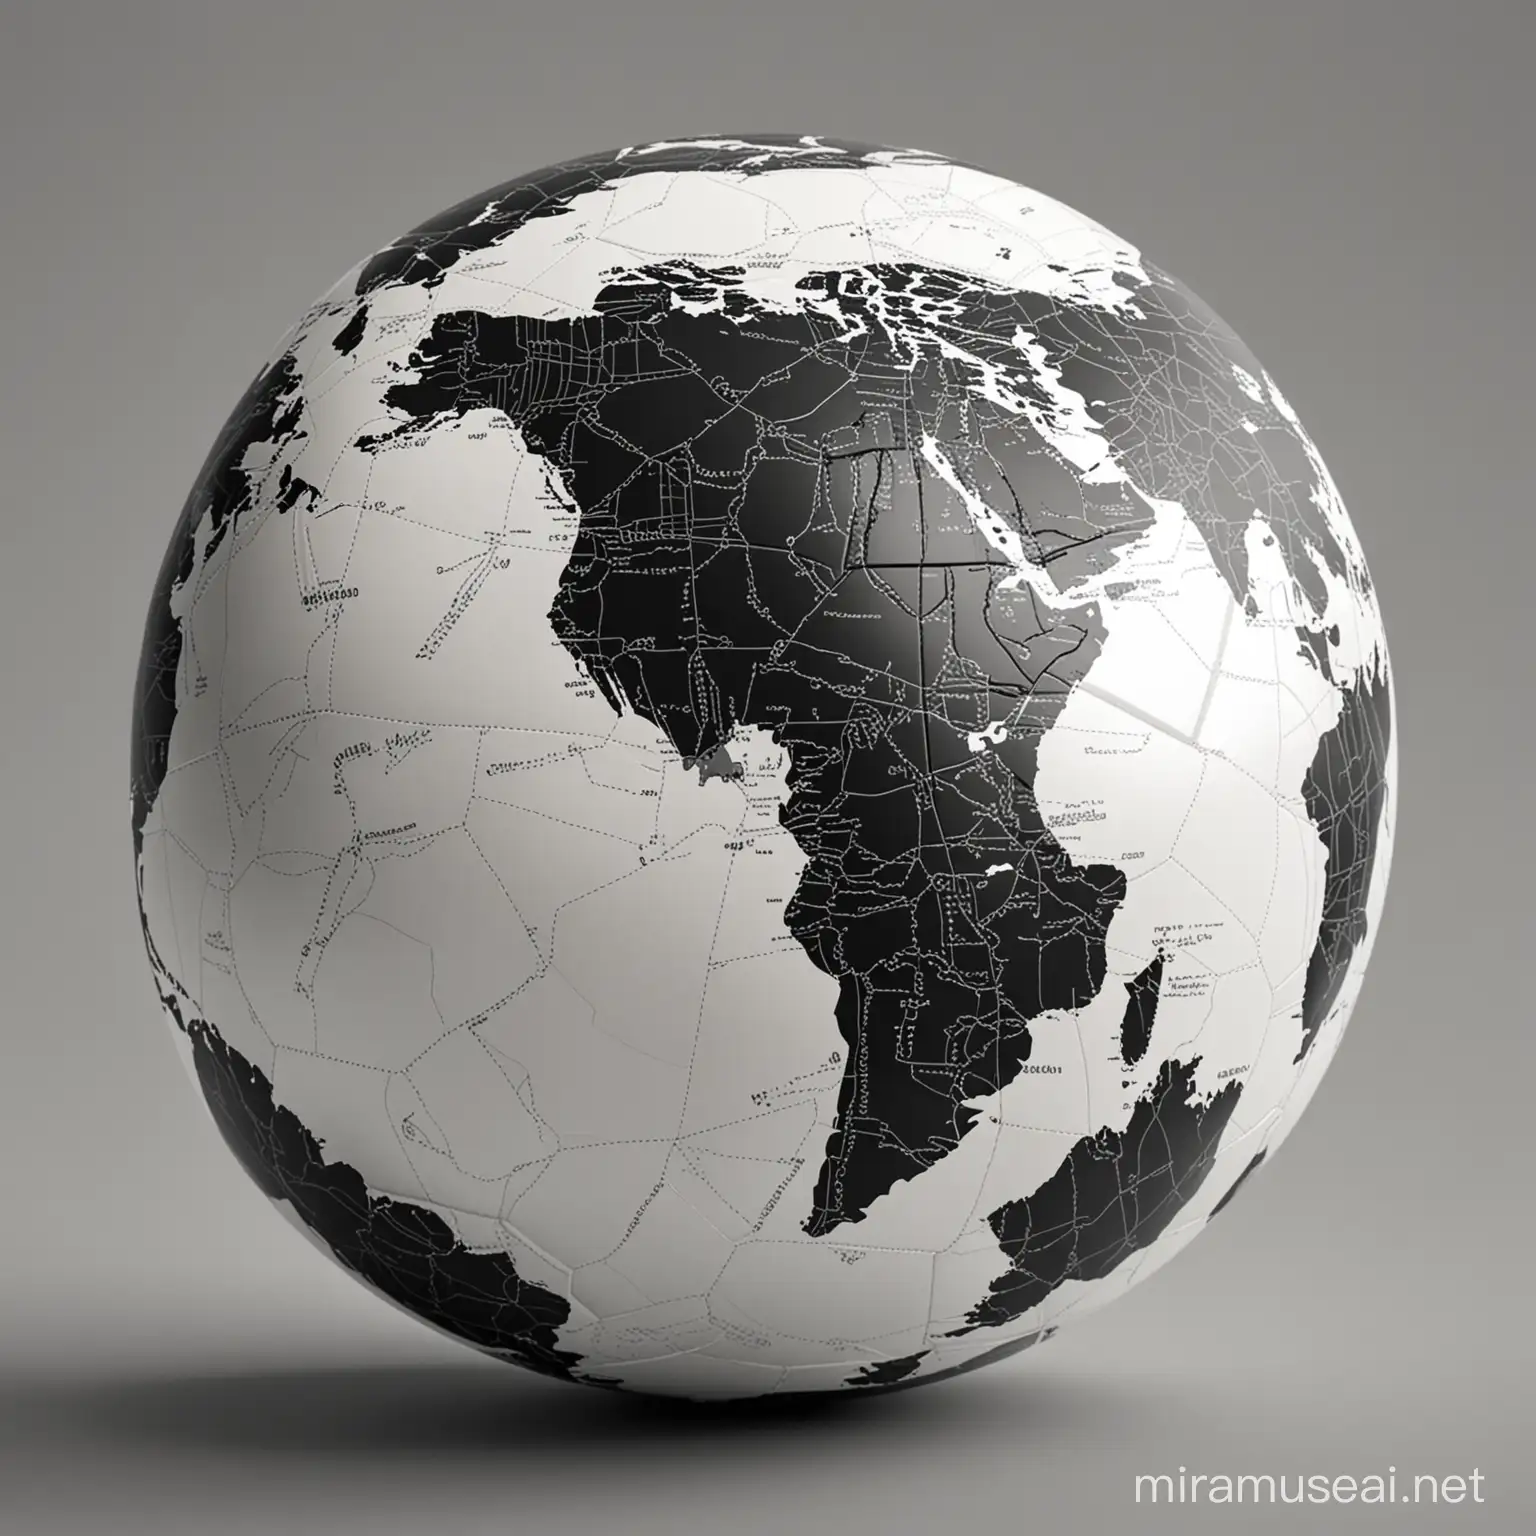 World Map Soccer Ball Unique Sporting Equipment with Global Design